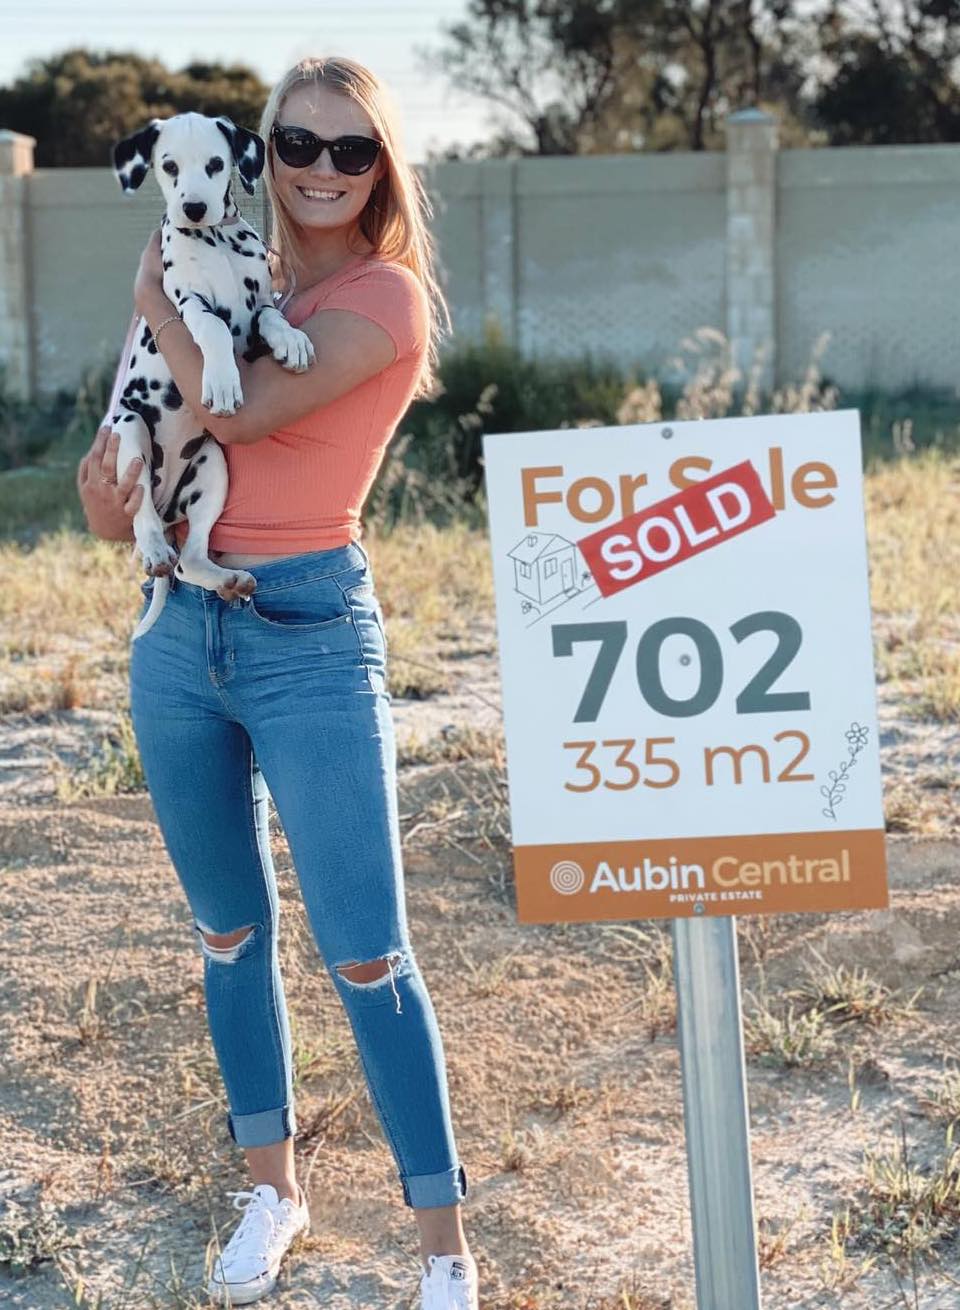 First home builder standing on their new land next to a sign that says "sold"